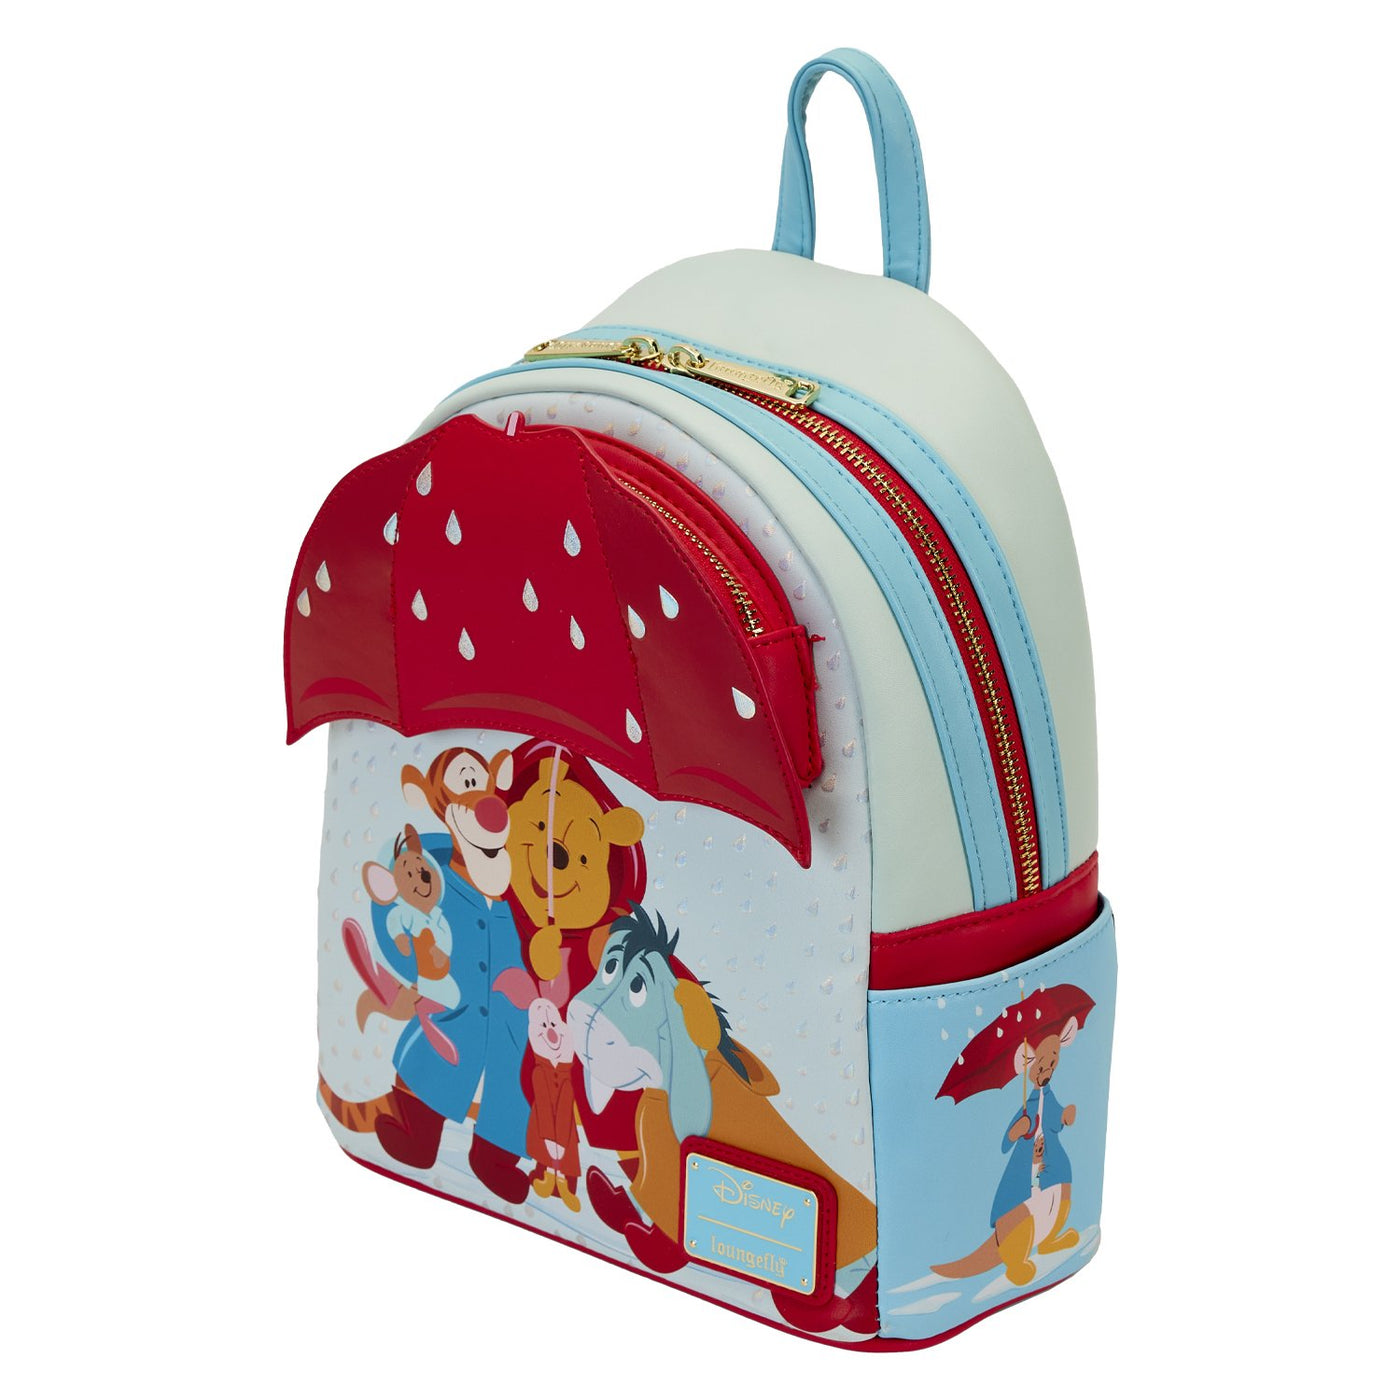 Loungefly Disney Winnie the Pooh and Friends Rainy Day Mini Backpack - Top View